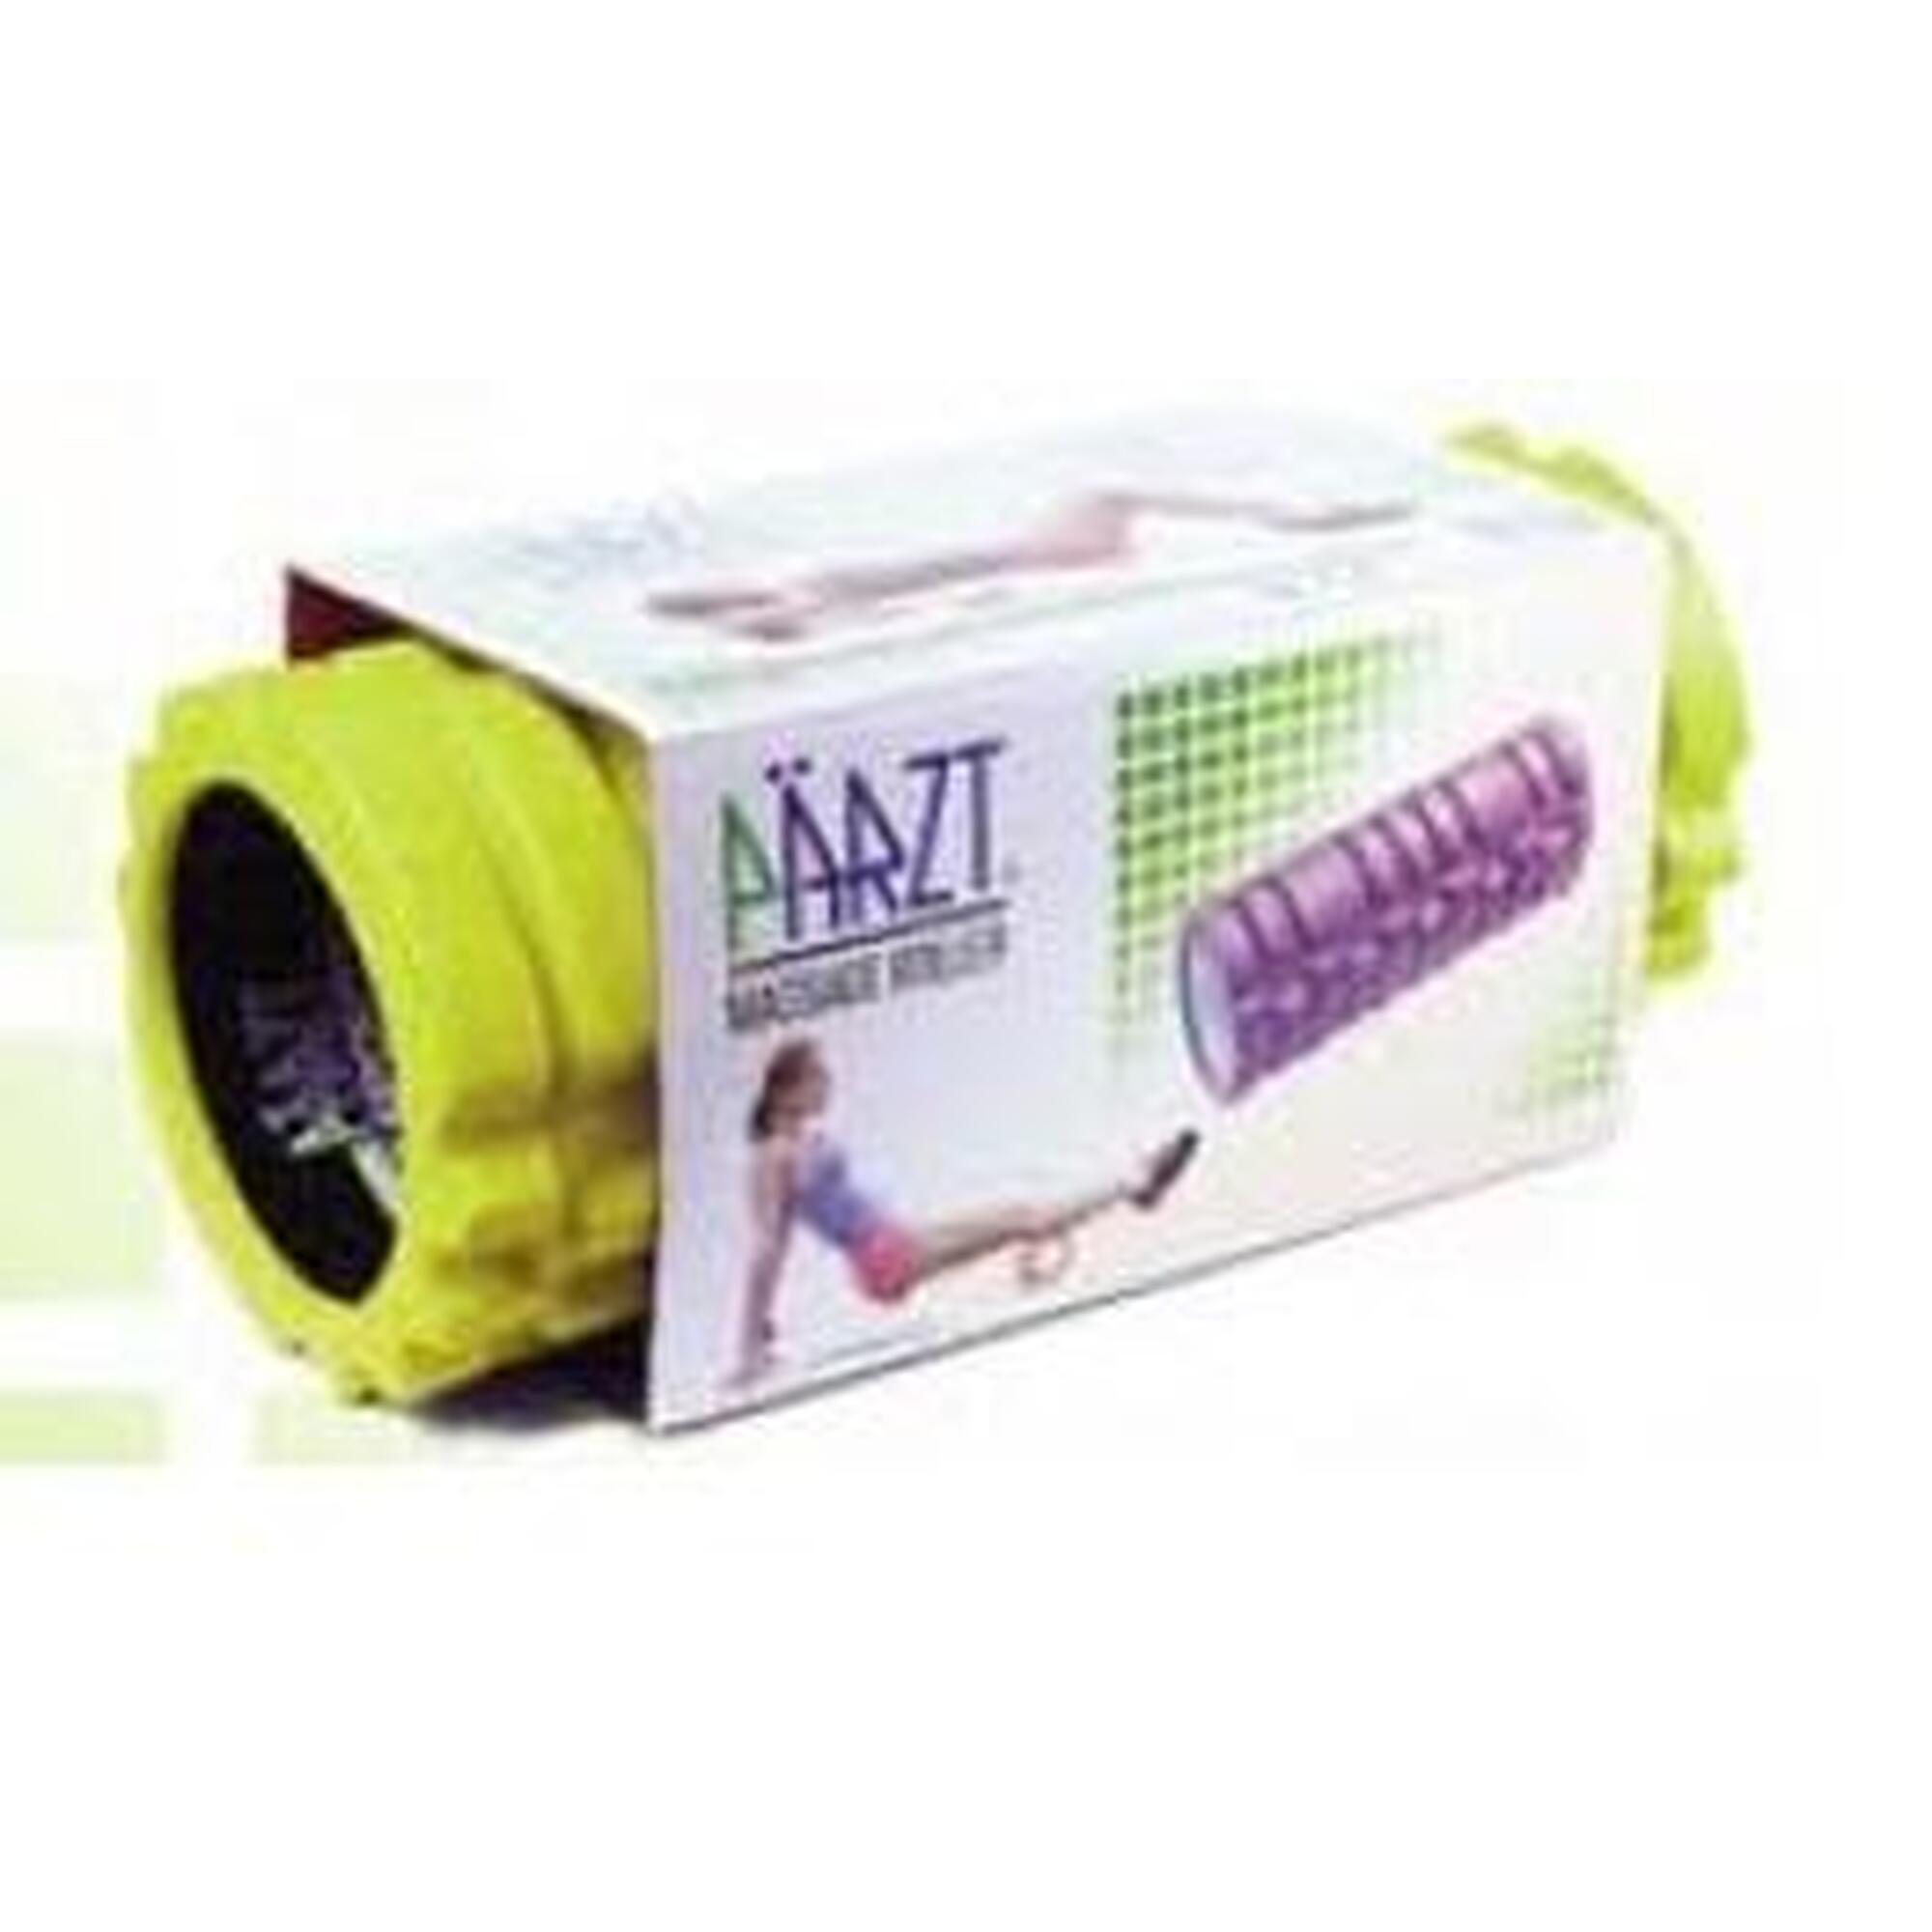 FOAM ROLLER 33cm x 14cm (Grid and Spikes) - YELLOW